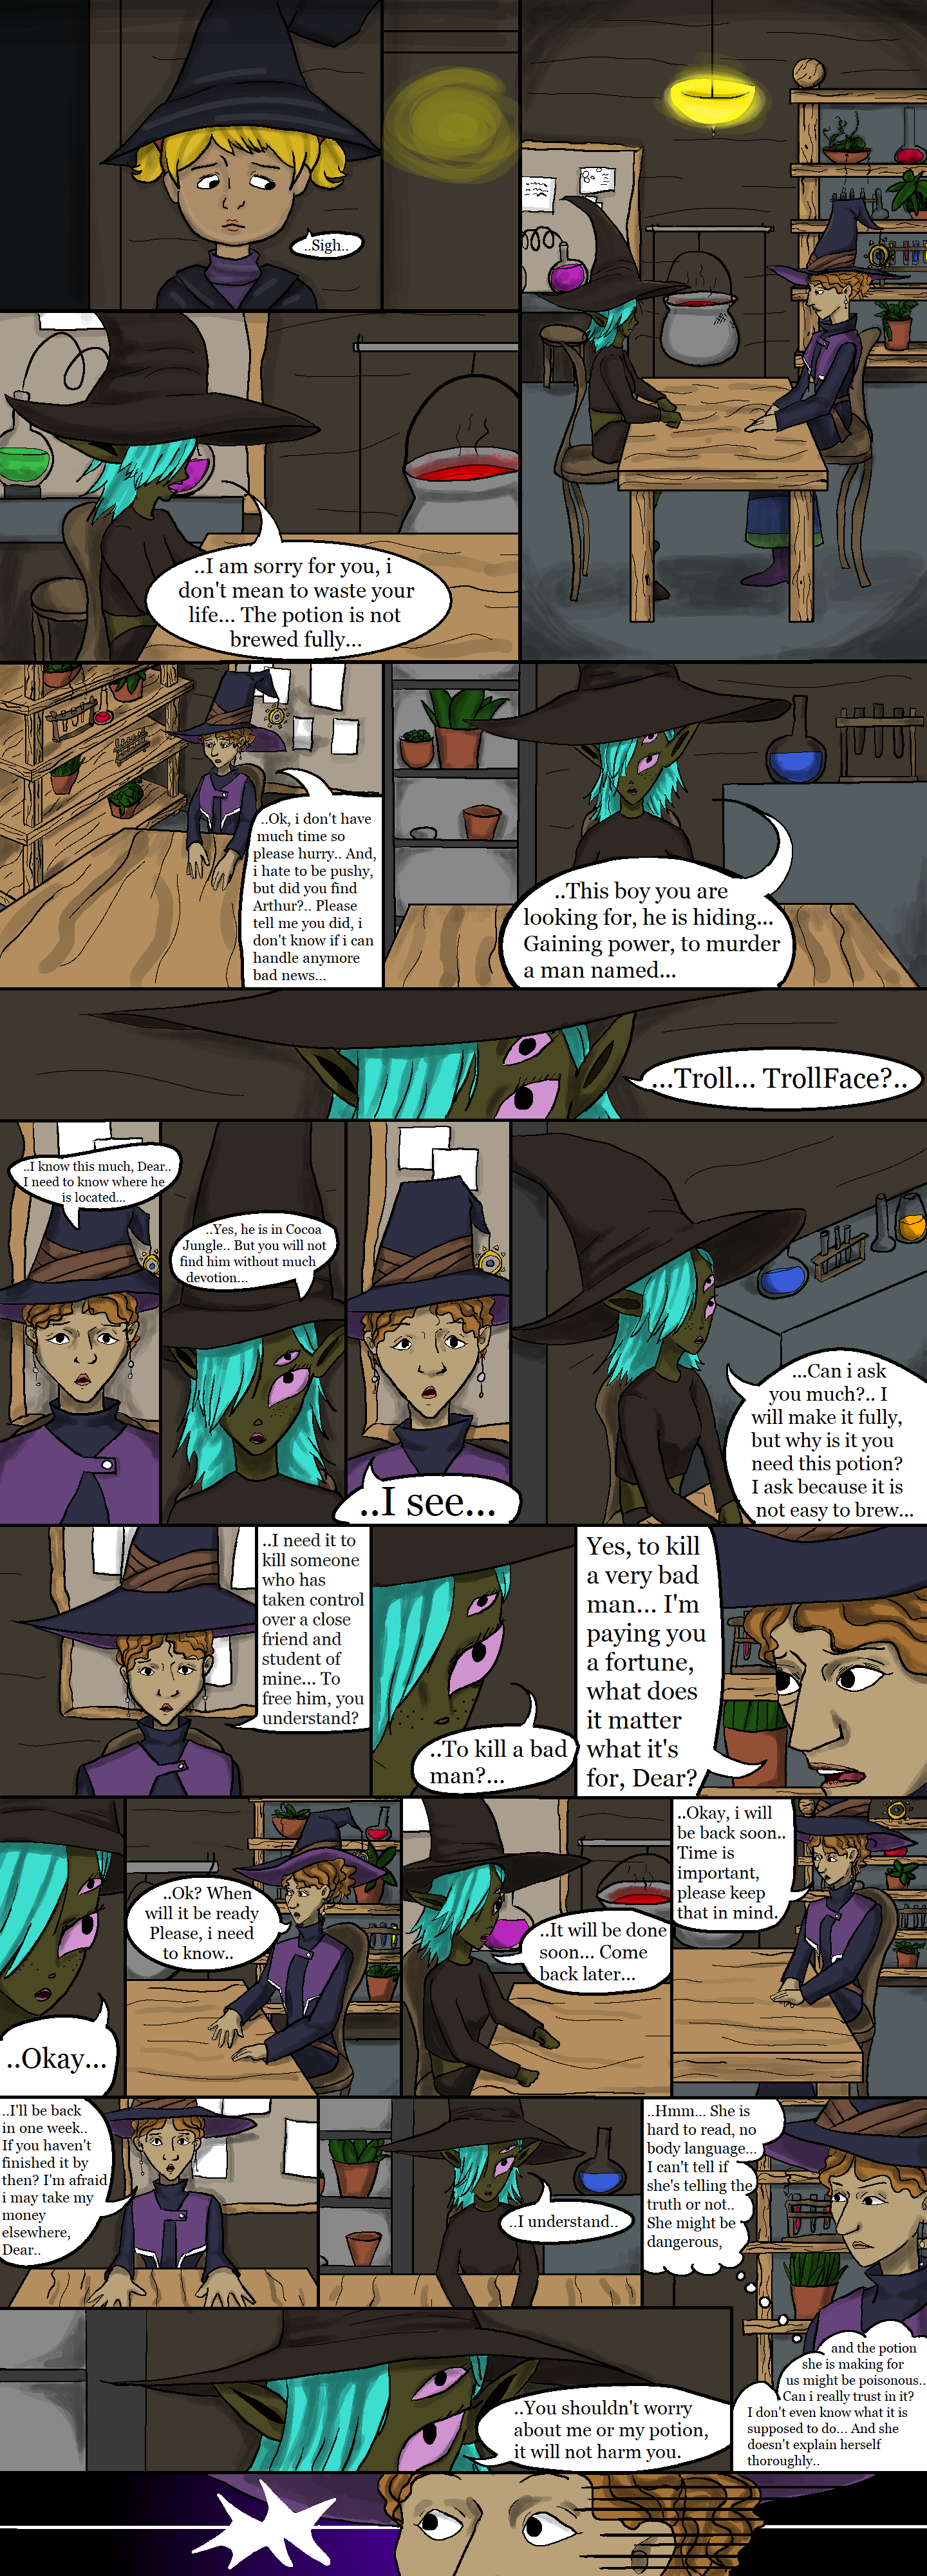 ch25/pg5.png. If you're seeing this, enable images. Or, perhaps we have a website issue. Try refreshing, if unsuccessful email commodorian@tailsgetstrolled.org with a detailed description of how you got here.